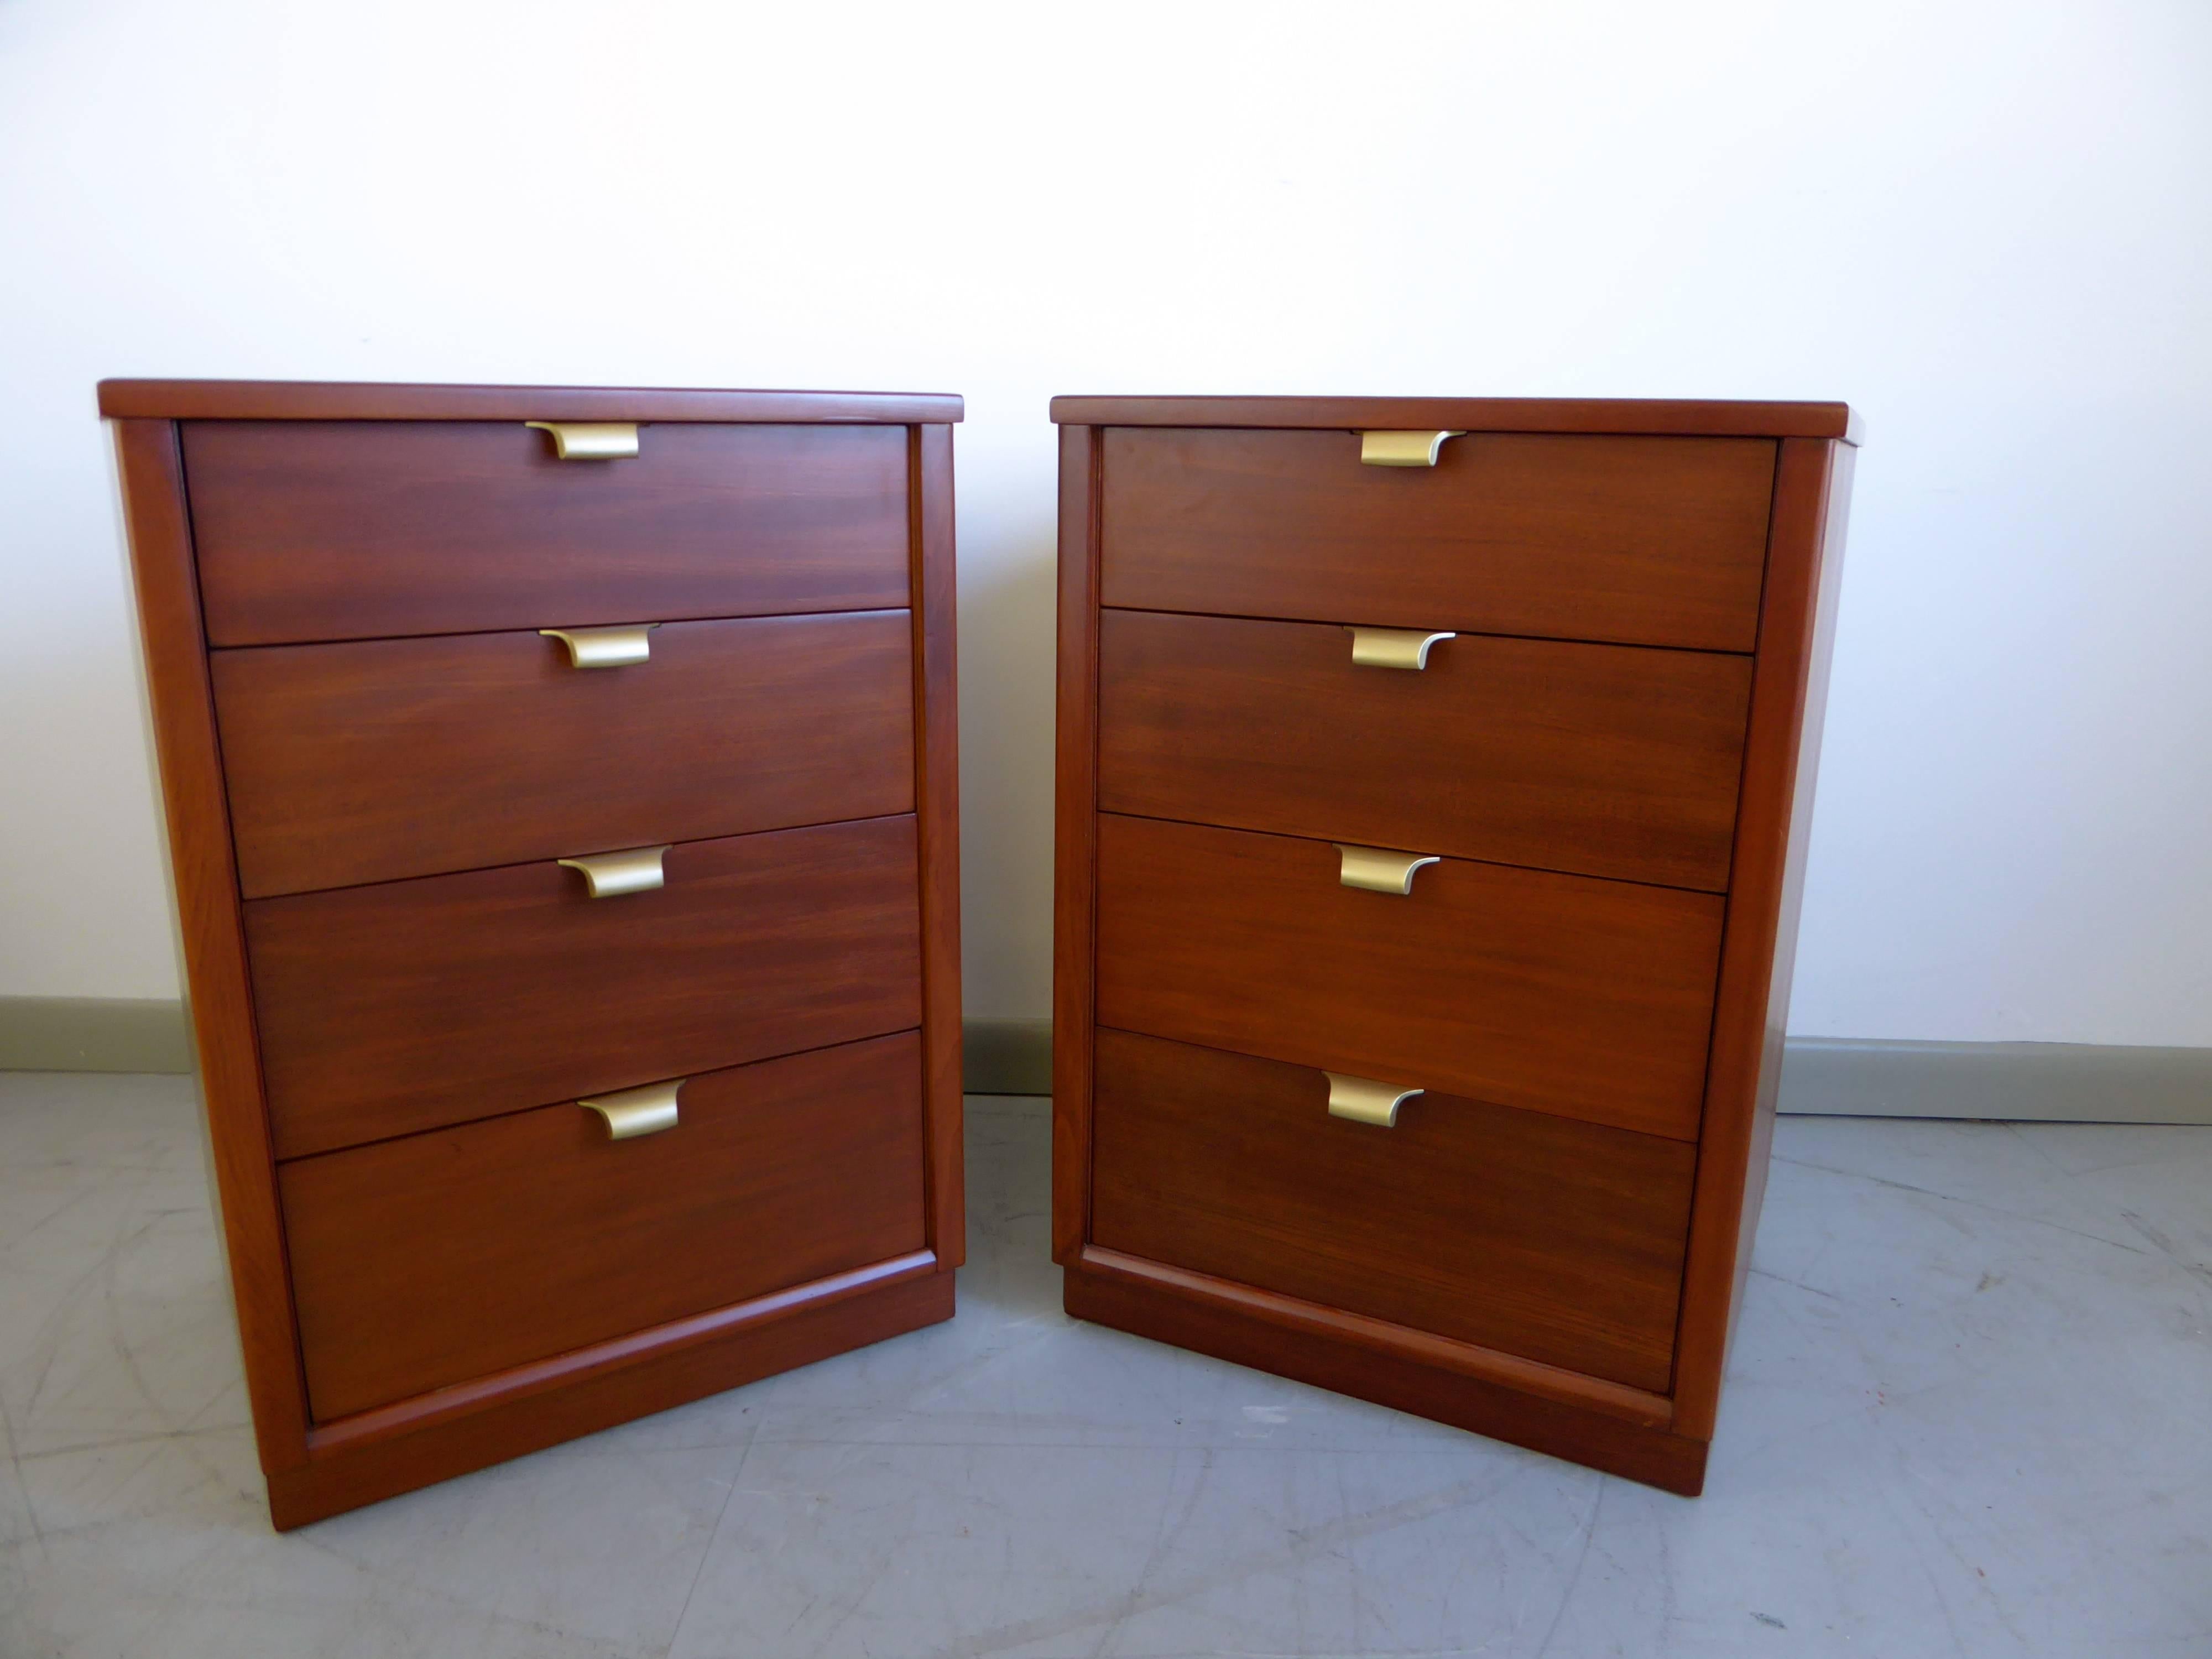 Newly refinished chest of drawers or nightstands by Edward Wormley for Drexel. Four drawers with brass pulls.